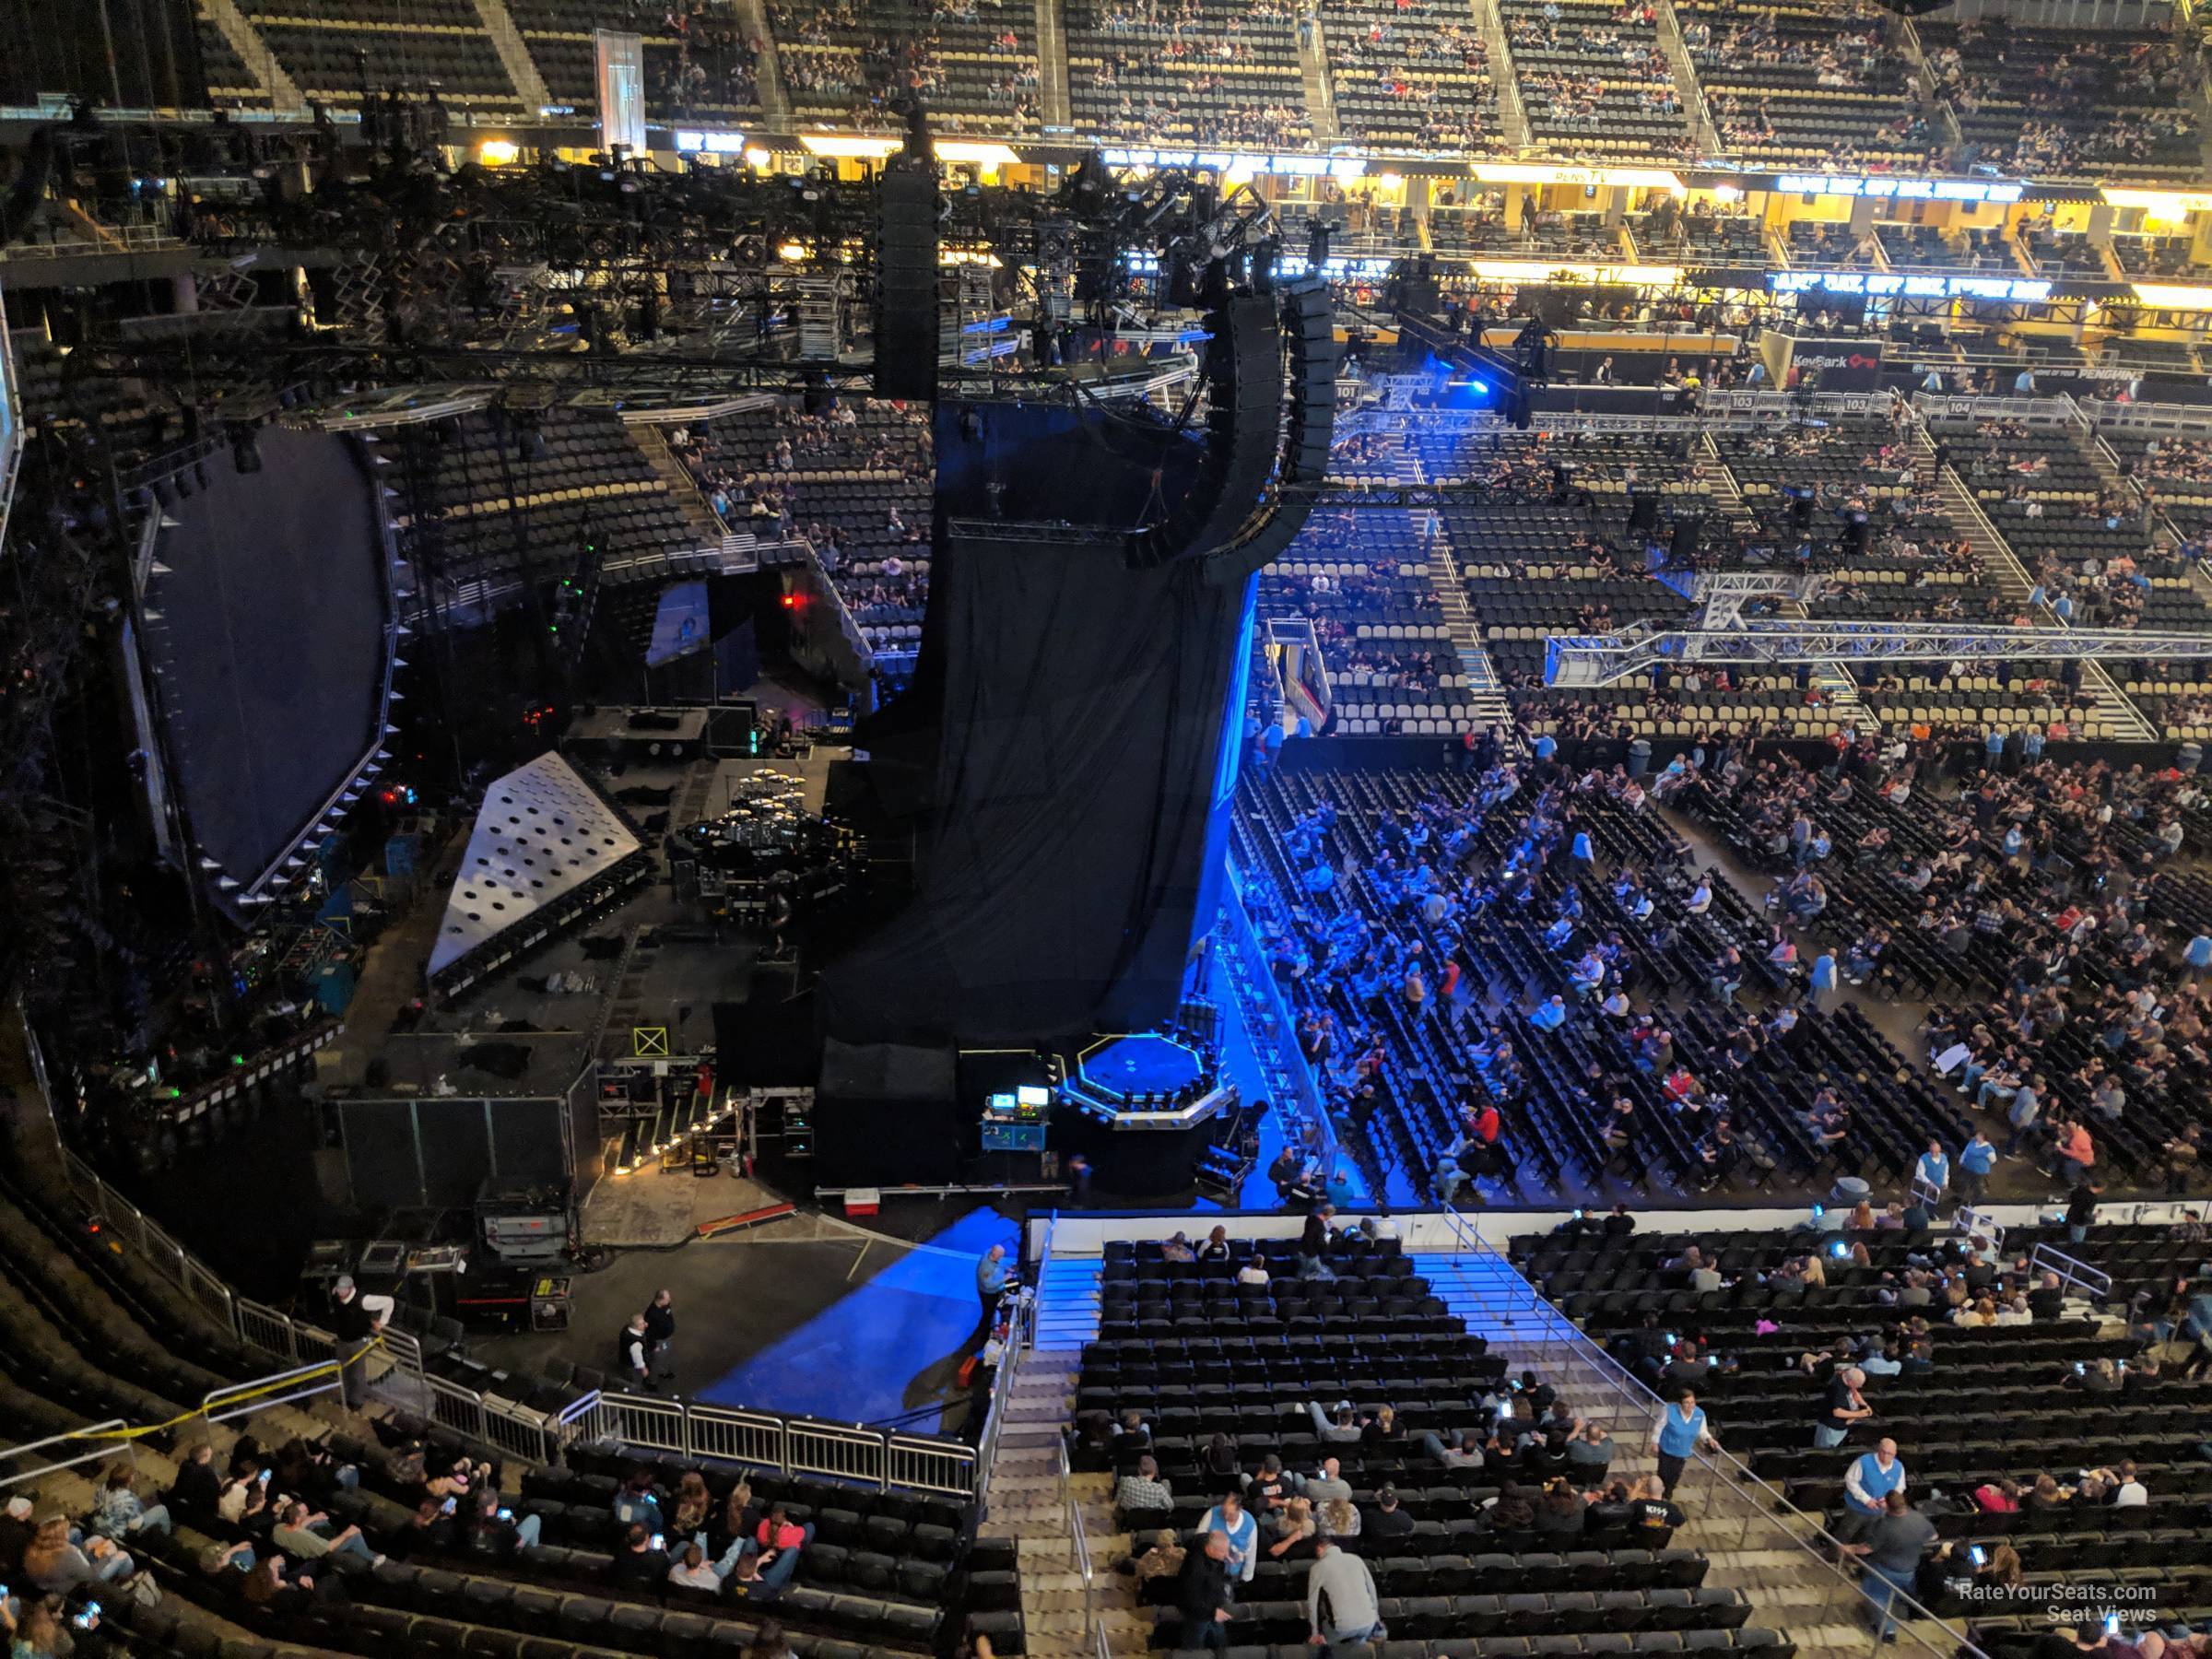 Section 222 at PPG Paints Arena